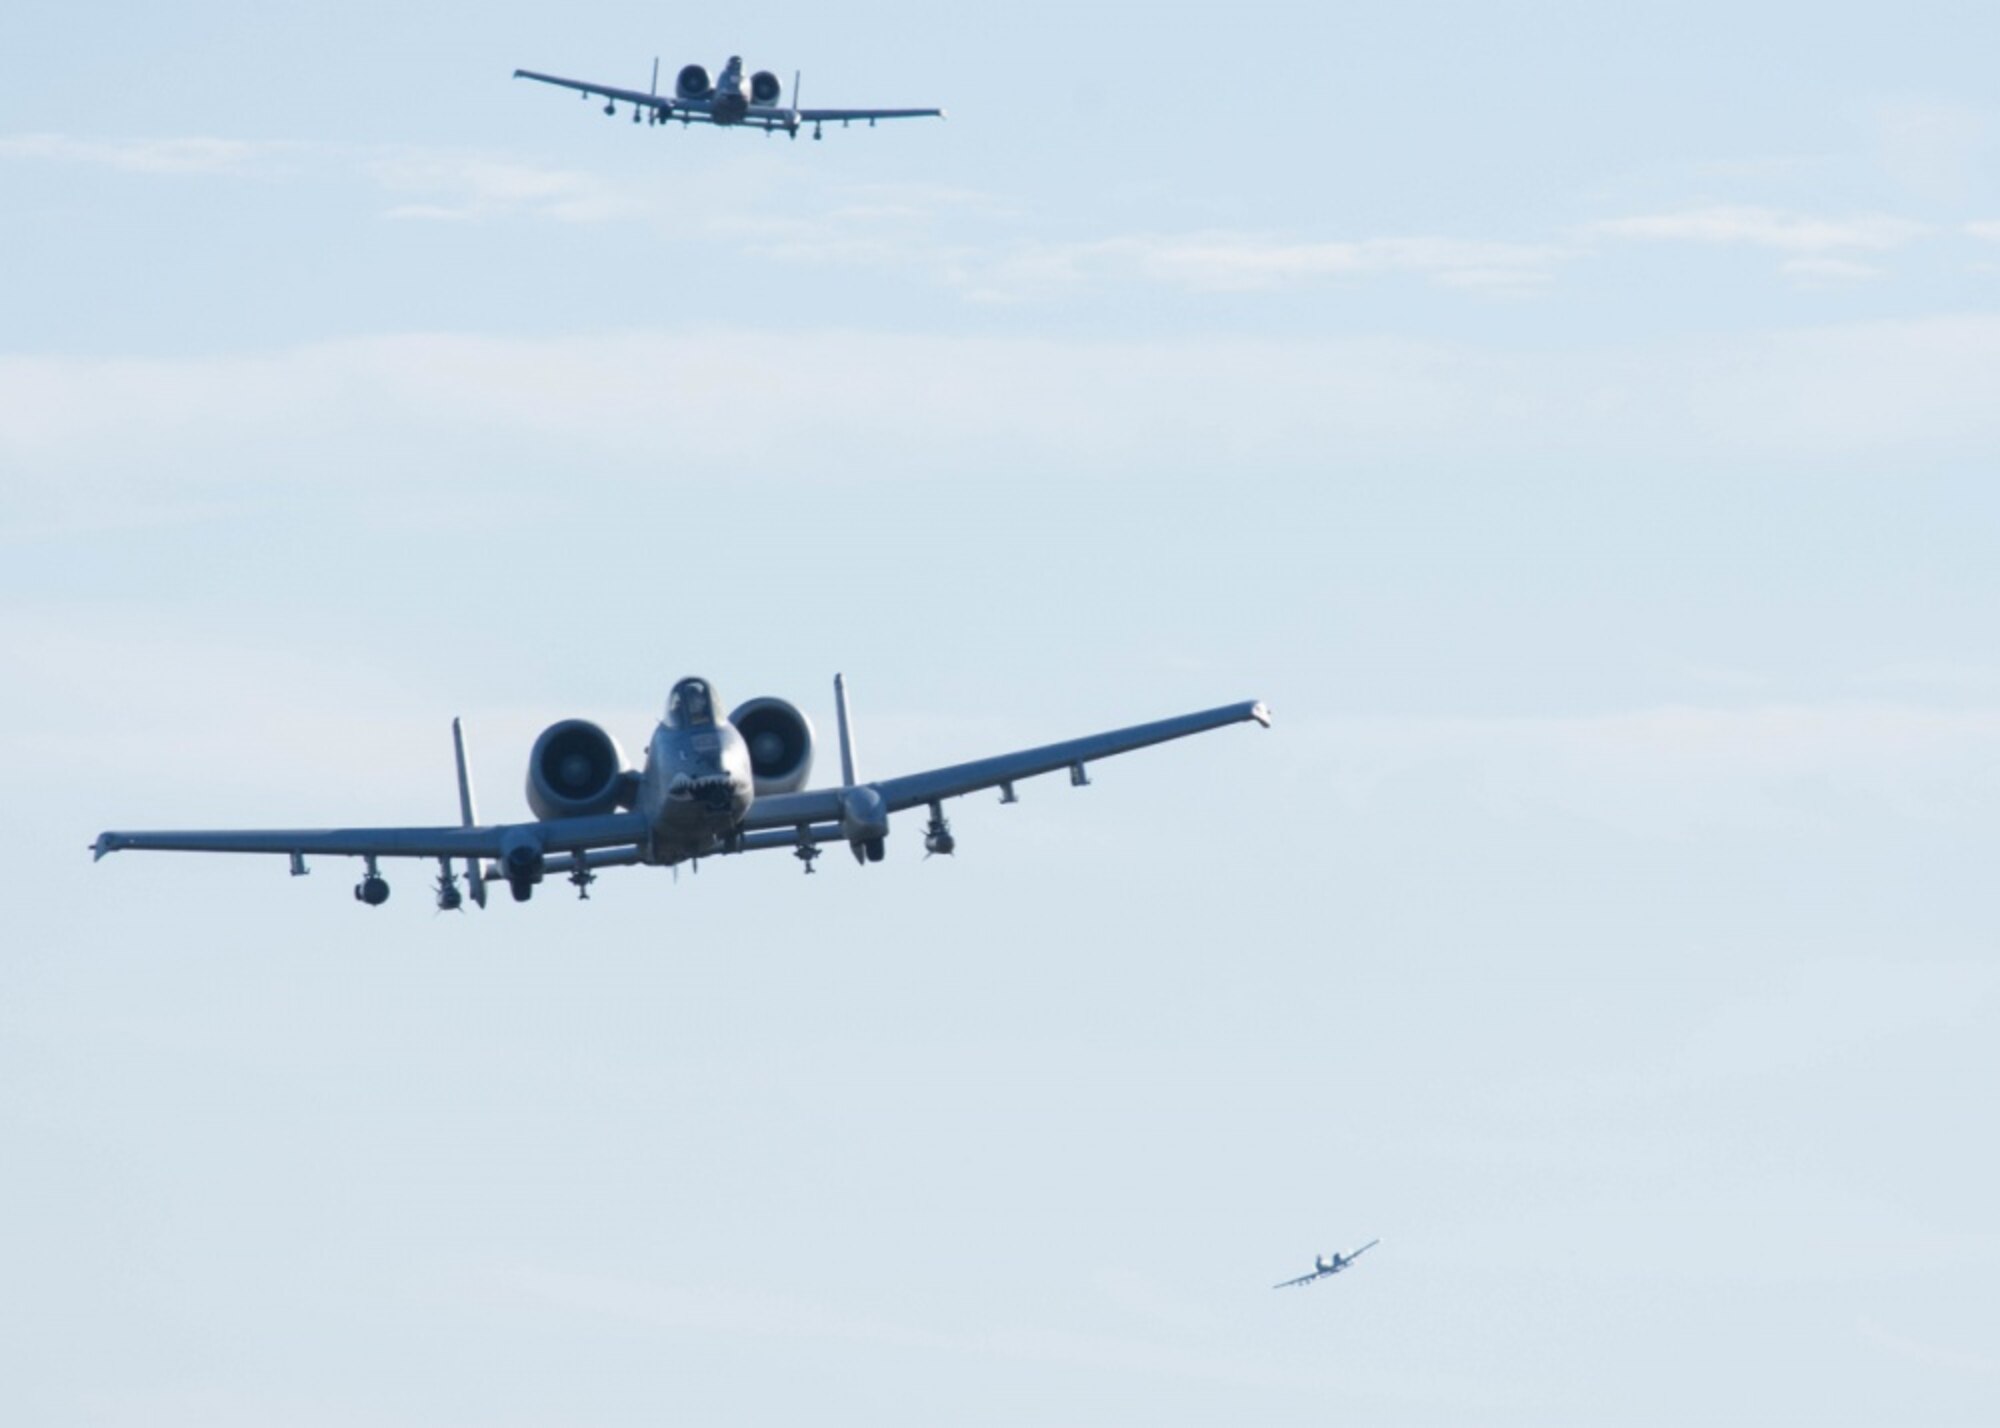 A-10C Thunderbolt II pilots assigned to the 74th Fighter Squadron from Moody Air Force Base, Ga., demonstrate a show of force maneuver during Hawgsmoke 2018 at Cannon Range, Mo., Oct. 18, 2018. The competition is a biennial worldwide A-10 bombing, missile and tactical gunnery competition derived from the discontinued "Gunsmoke" Air Force Worldwide Gunnery Competition. The 74th FS brought home the top overall team award, Top Tactical and Top Conventional team awards. Based on their winning performance, Moody is slated to host the next Hawgsmoke in 2020. (U.S. Air Force photo by Senior Airman Missy Sterling)